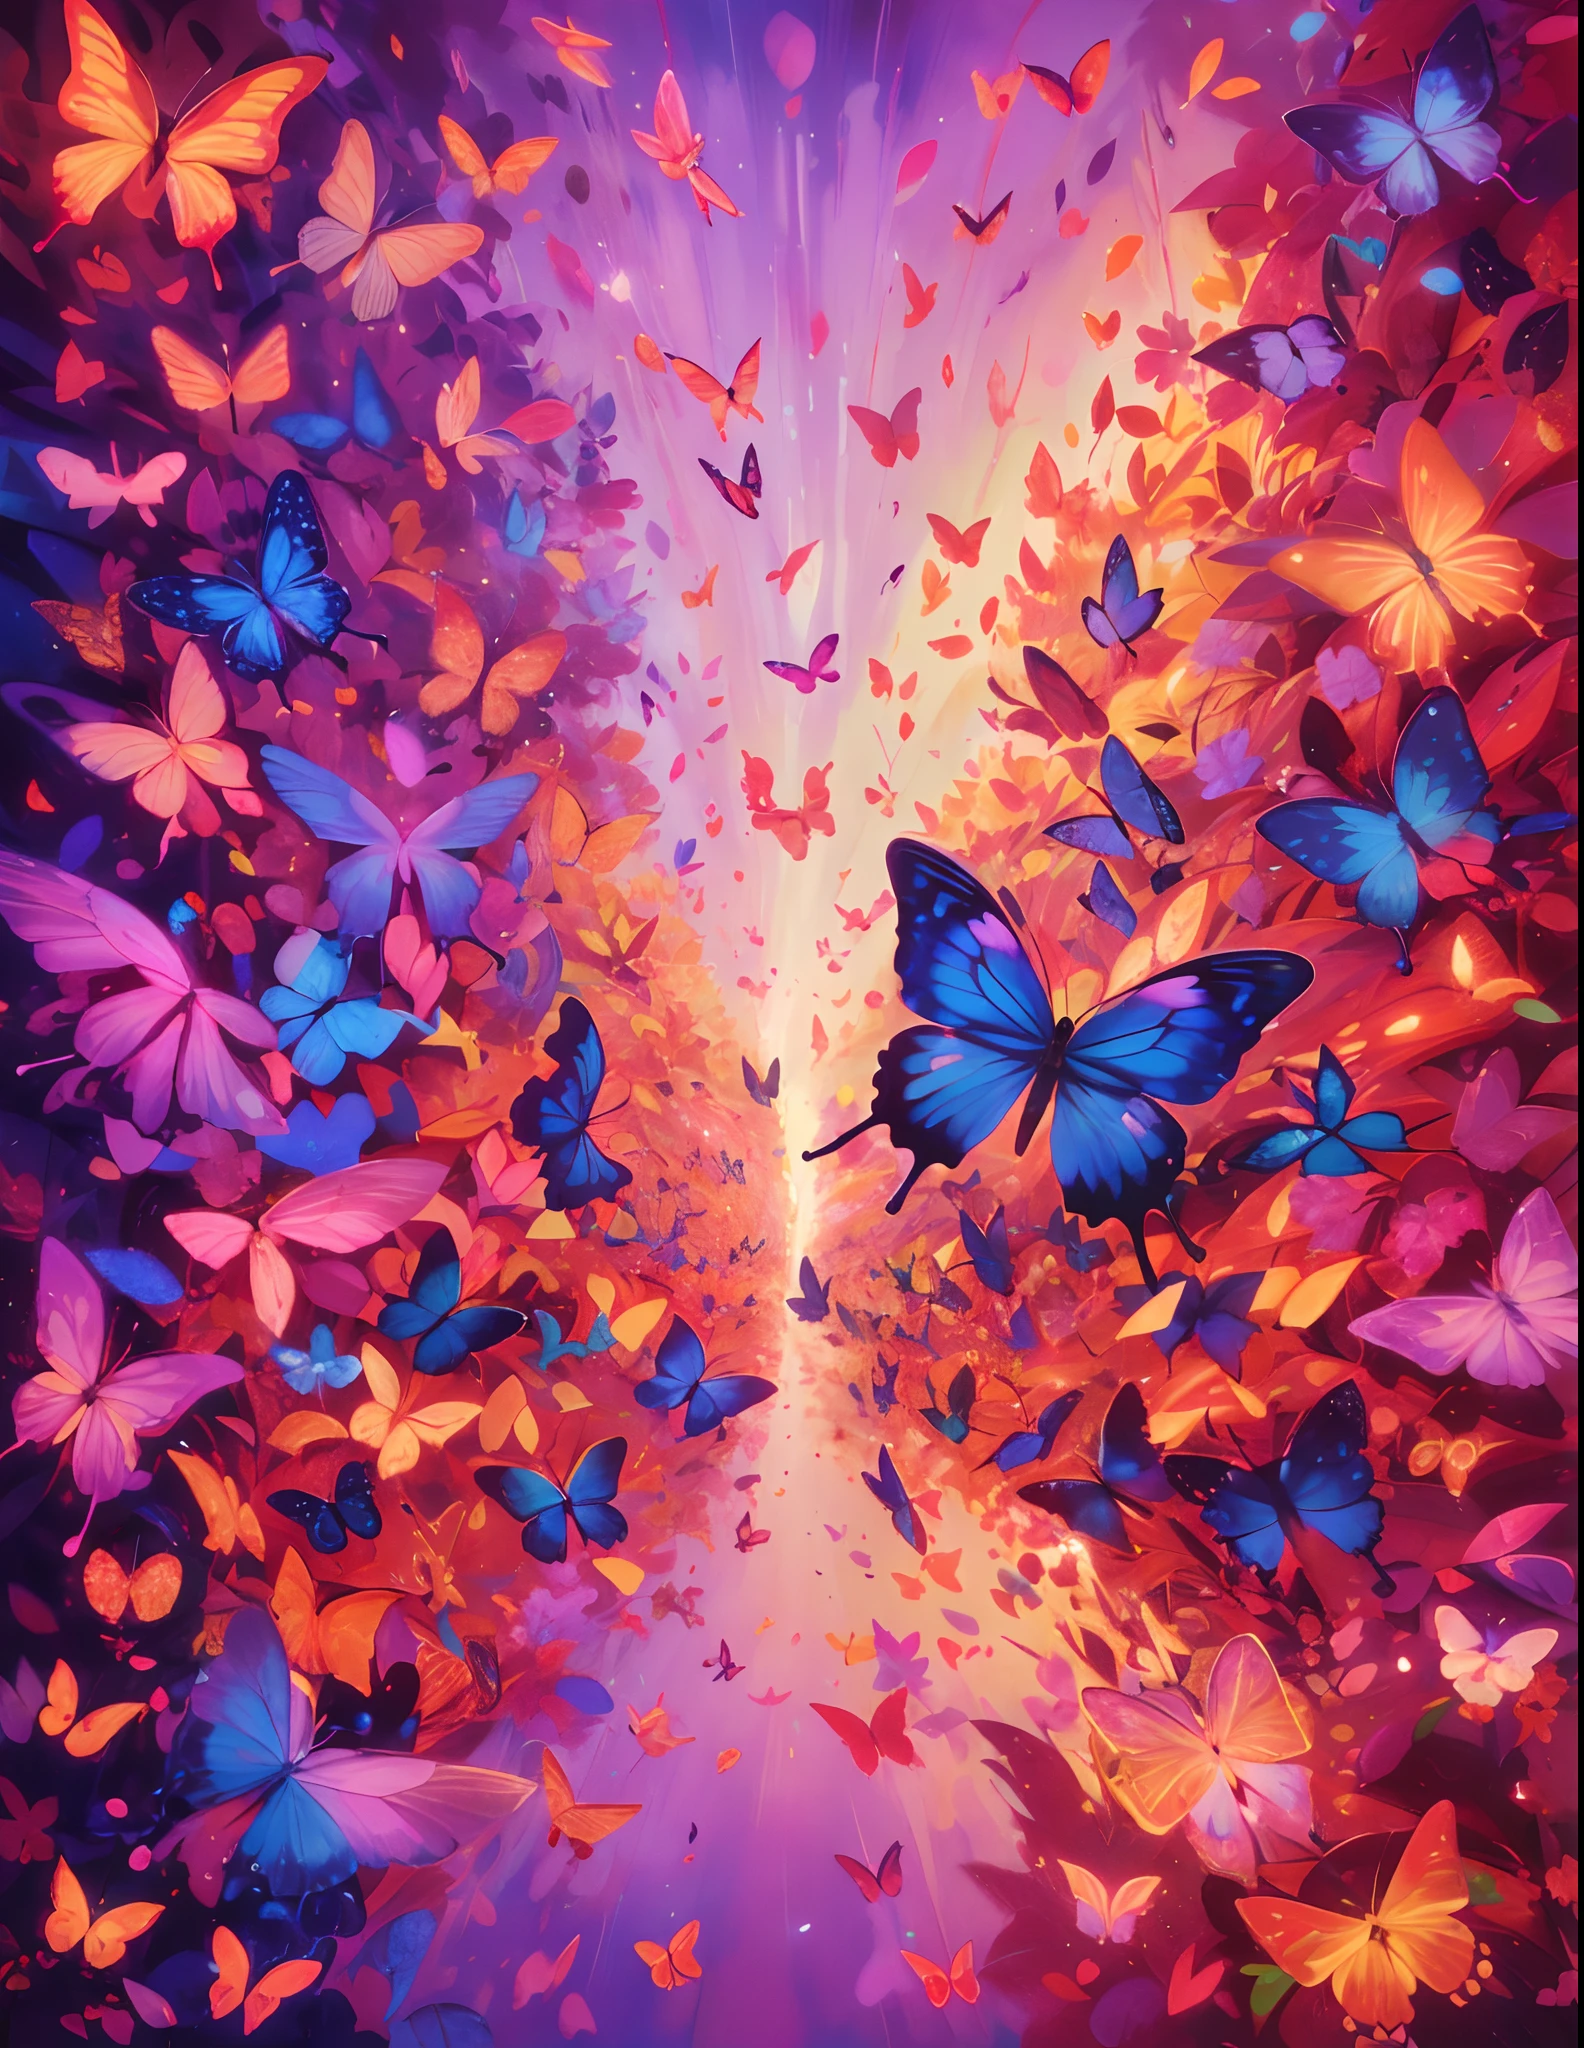 (best quality,highres,ultra-detailed),a butterfly, a kaleidoscope of butterflies, lots of glowing butterflies,purple and pink, gold and red,vibrant colors,abstract art,diverse textures,playful composition,bright lights,energy flow,harmonious design,transformational patterns,interconnected lines,surreal atmosphere,nature-inspired elements,symmetry,fluid motion,shimmering effects,mysterious depth,mesmerizing optical illusions,visual poetry